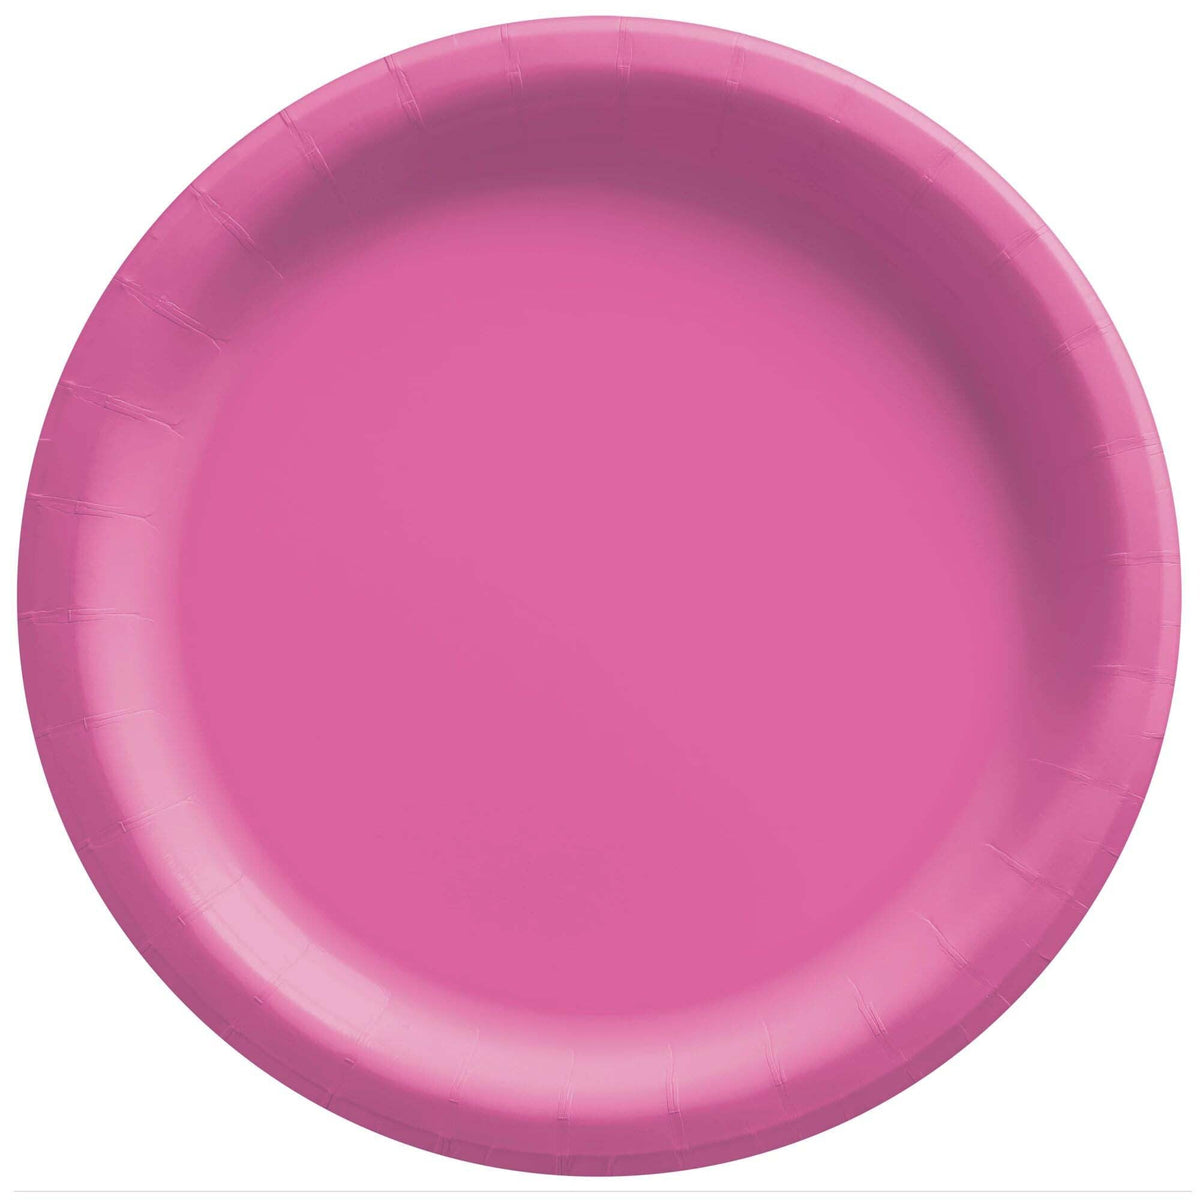 AMSCAN CA Disposable-Plasticware Bright Pink Round Paper Plates, 9 Inches, 20 Count 192937242049